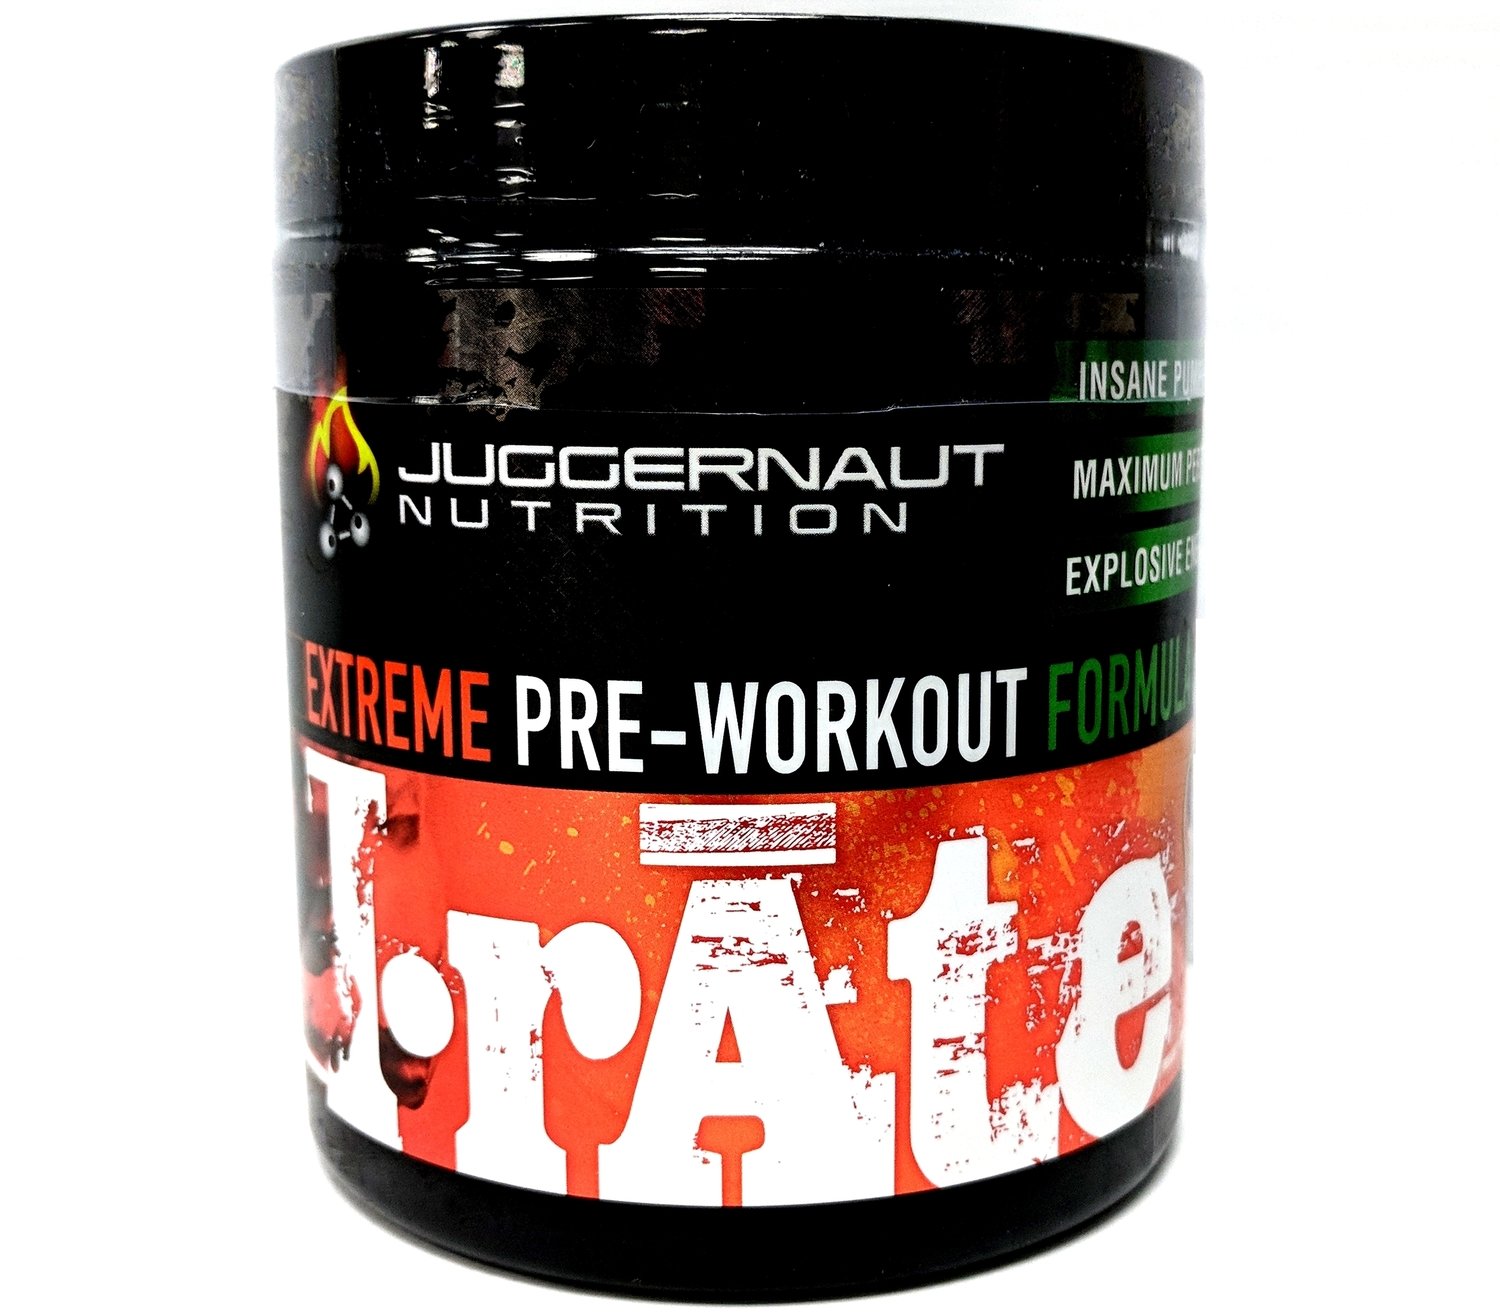 30 Minute Juggernaut irate pre workout review for Burn Fat fast